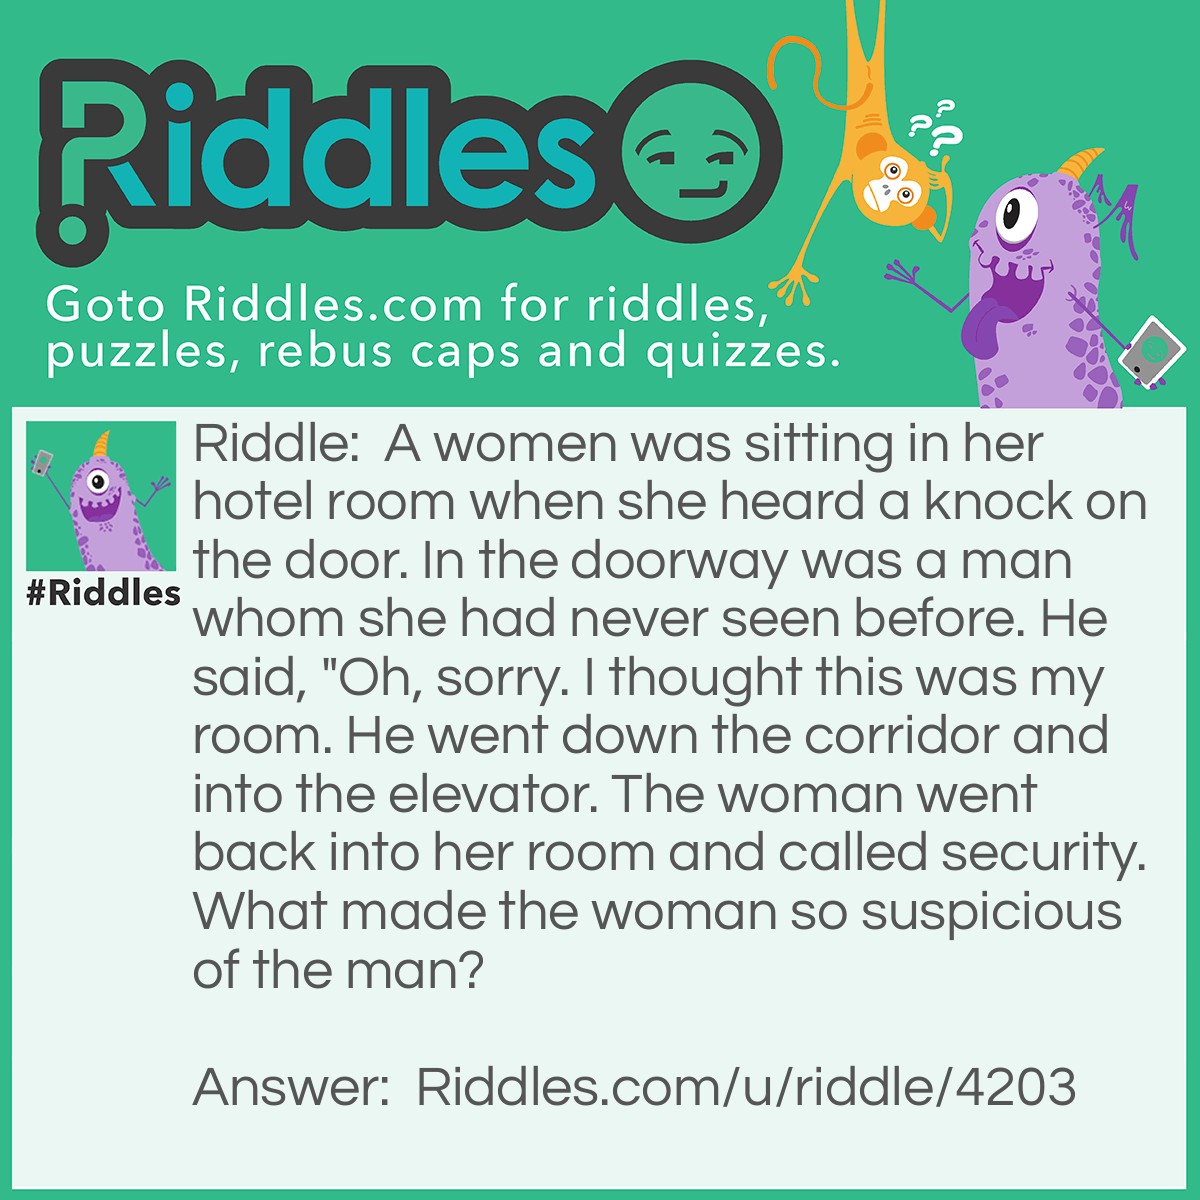 Riddle: A women was sitting in her hotel room when she heard a knock on the door. In the doorway was a man whom she had never seen before. He said, "Oh, sorry. I thought this was my room. He went down the corridor and into the elevator. The woman went back into her room and called security. What made the woman so suspicious of the man? Answer: You don't knock on your own hotel room door.